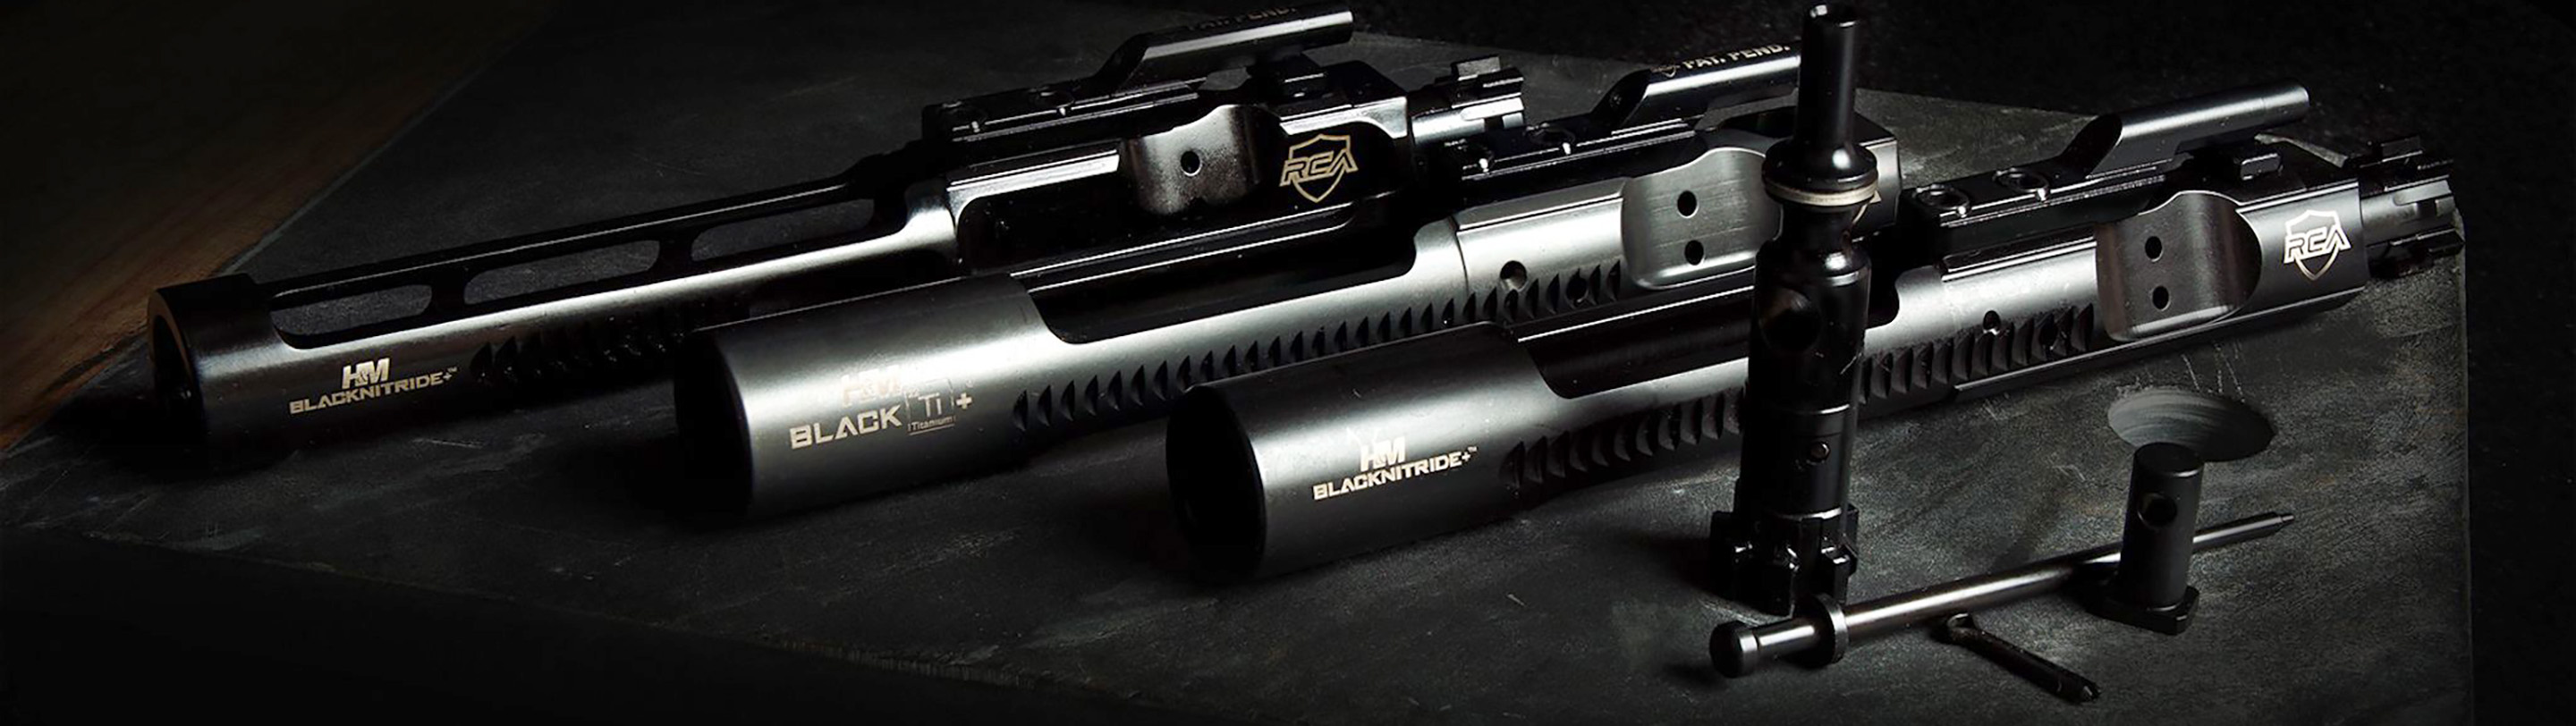 BEST-RATED AR-15 BOLT CARRIER GROUPS